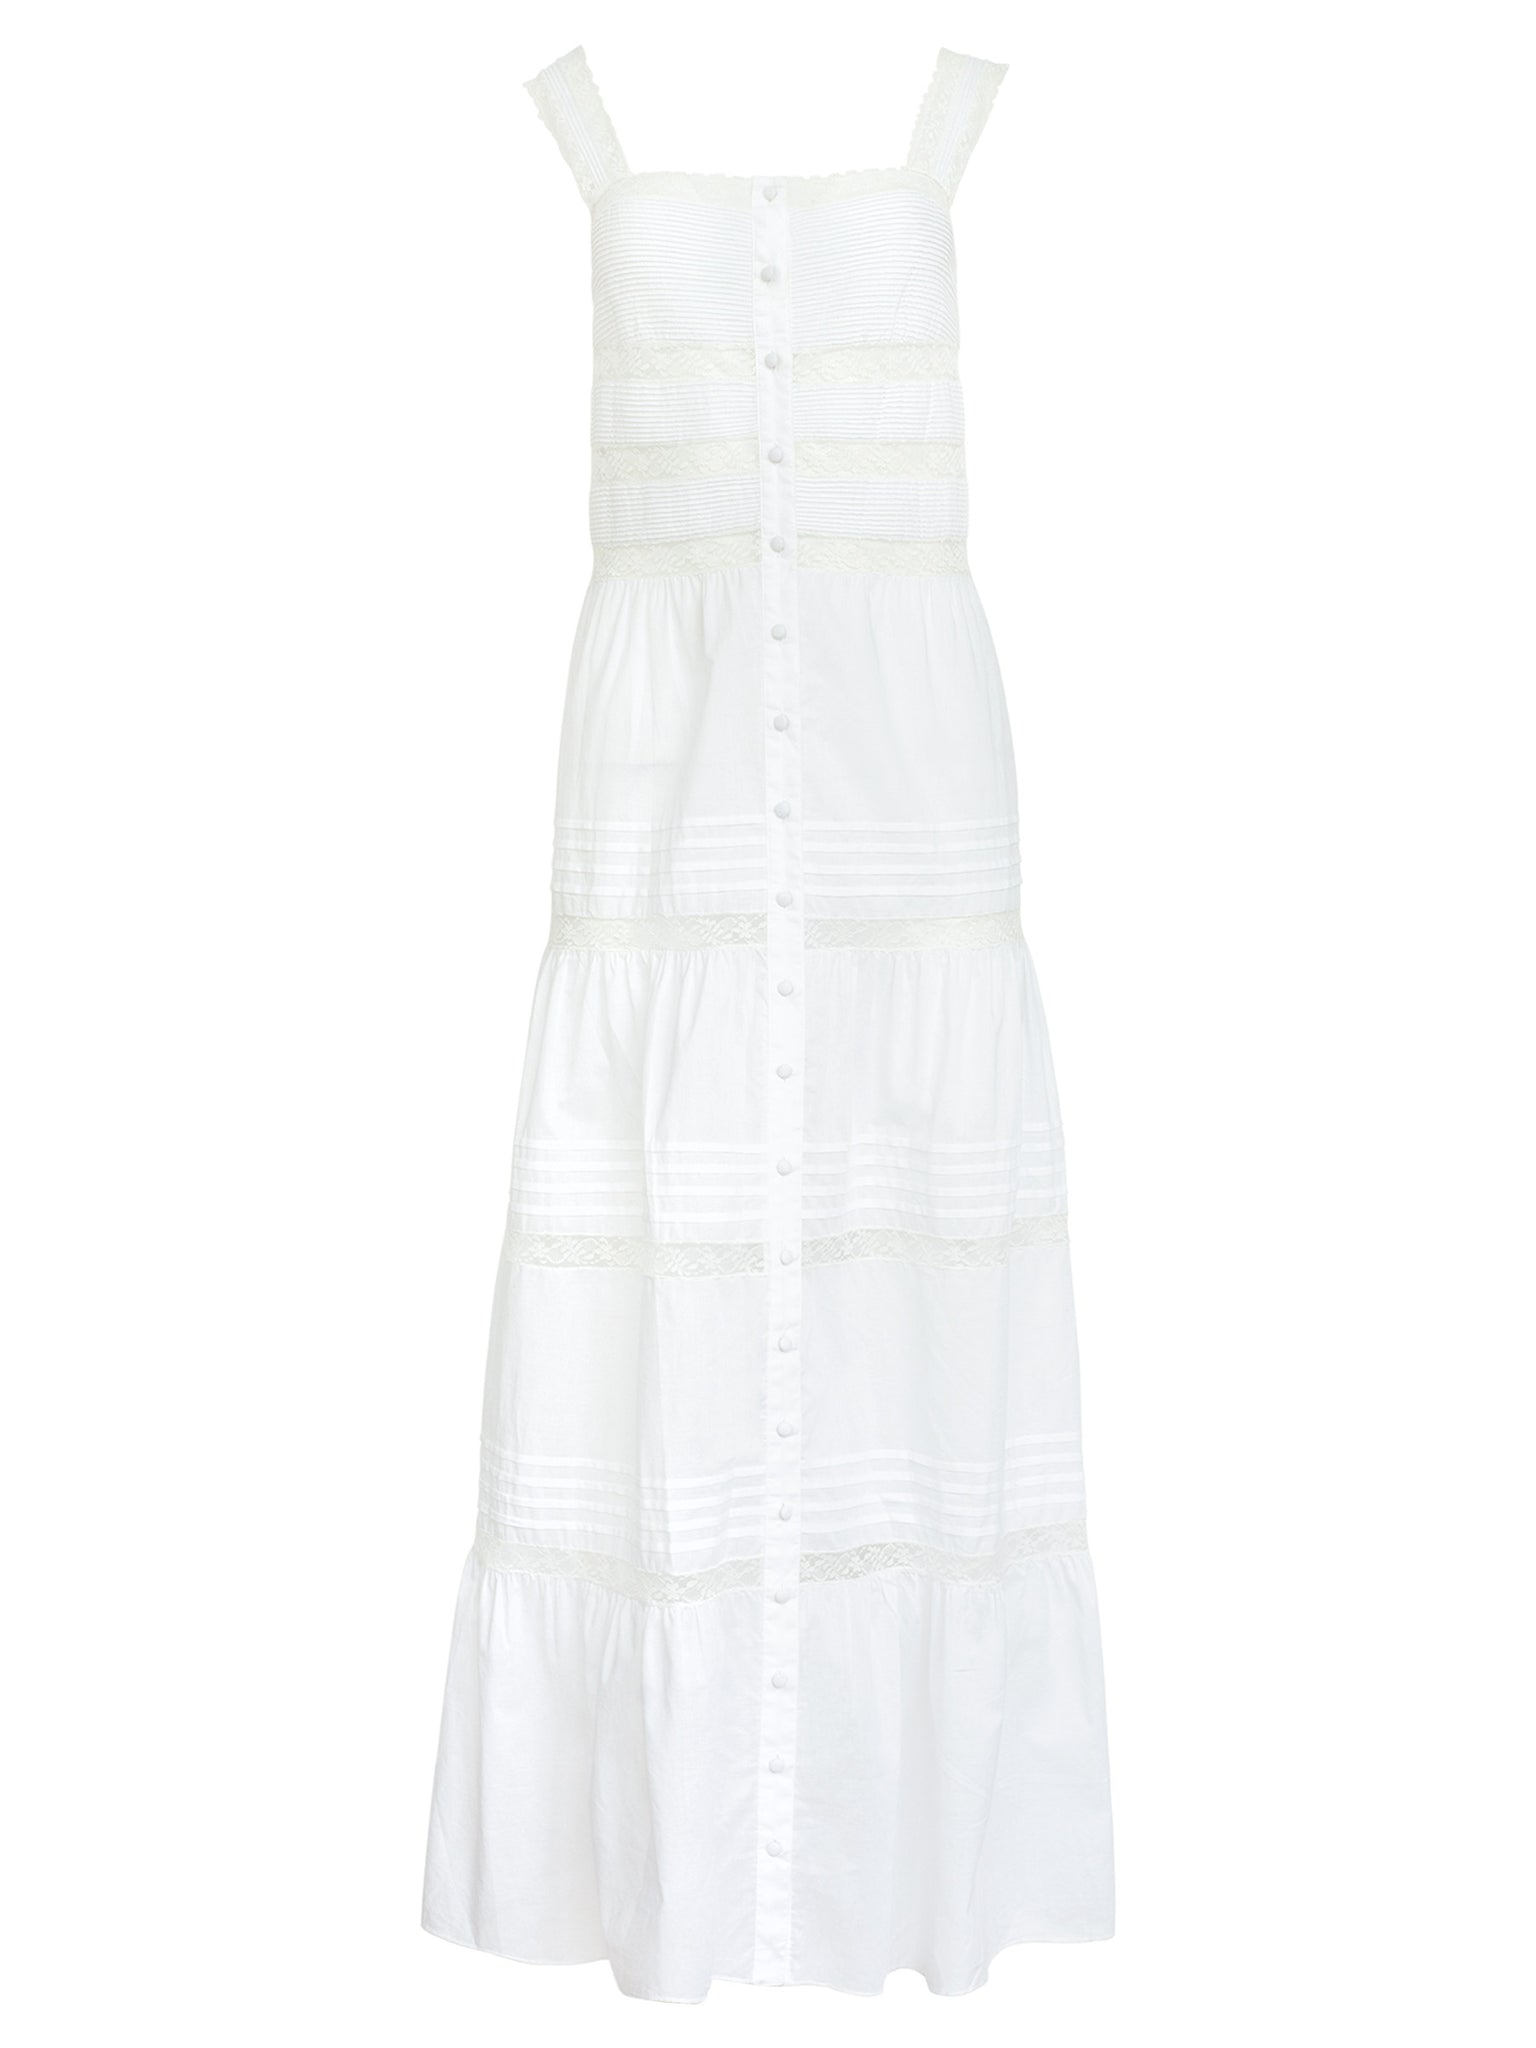 Sir the Label | Maci Midi Dress in White | The UNDONE by SIR.